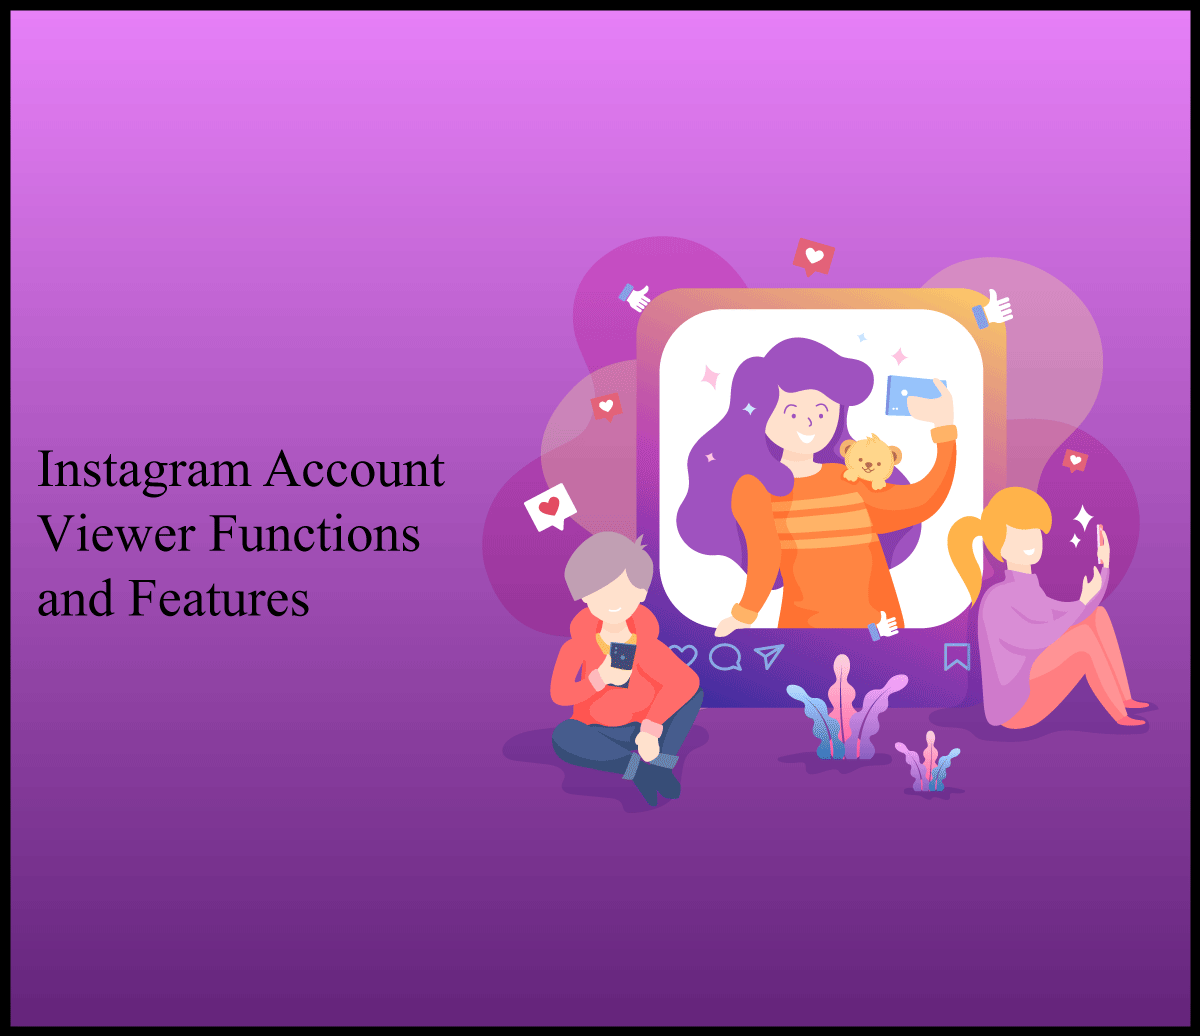 Instagram Account Viewer: Functions and Features